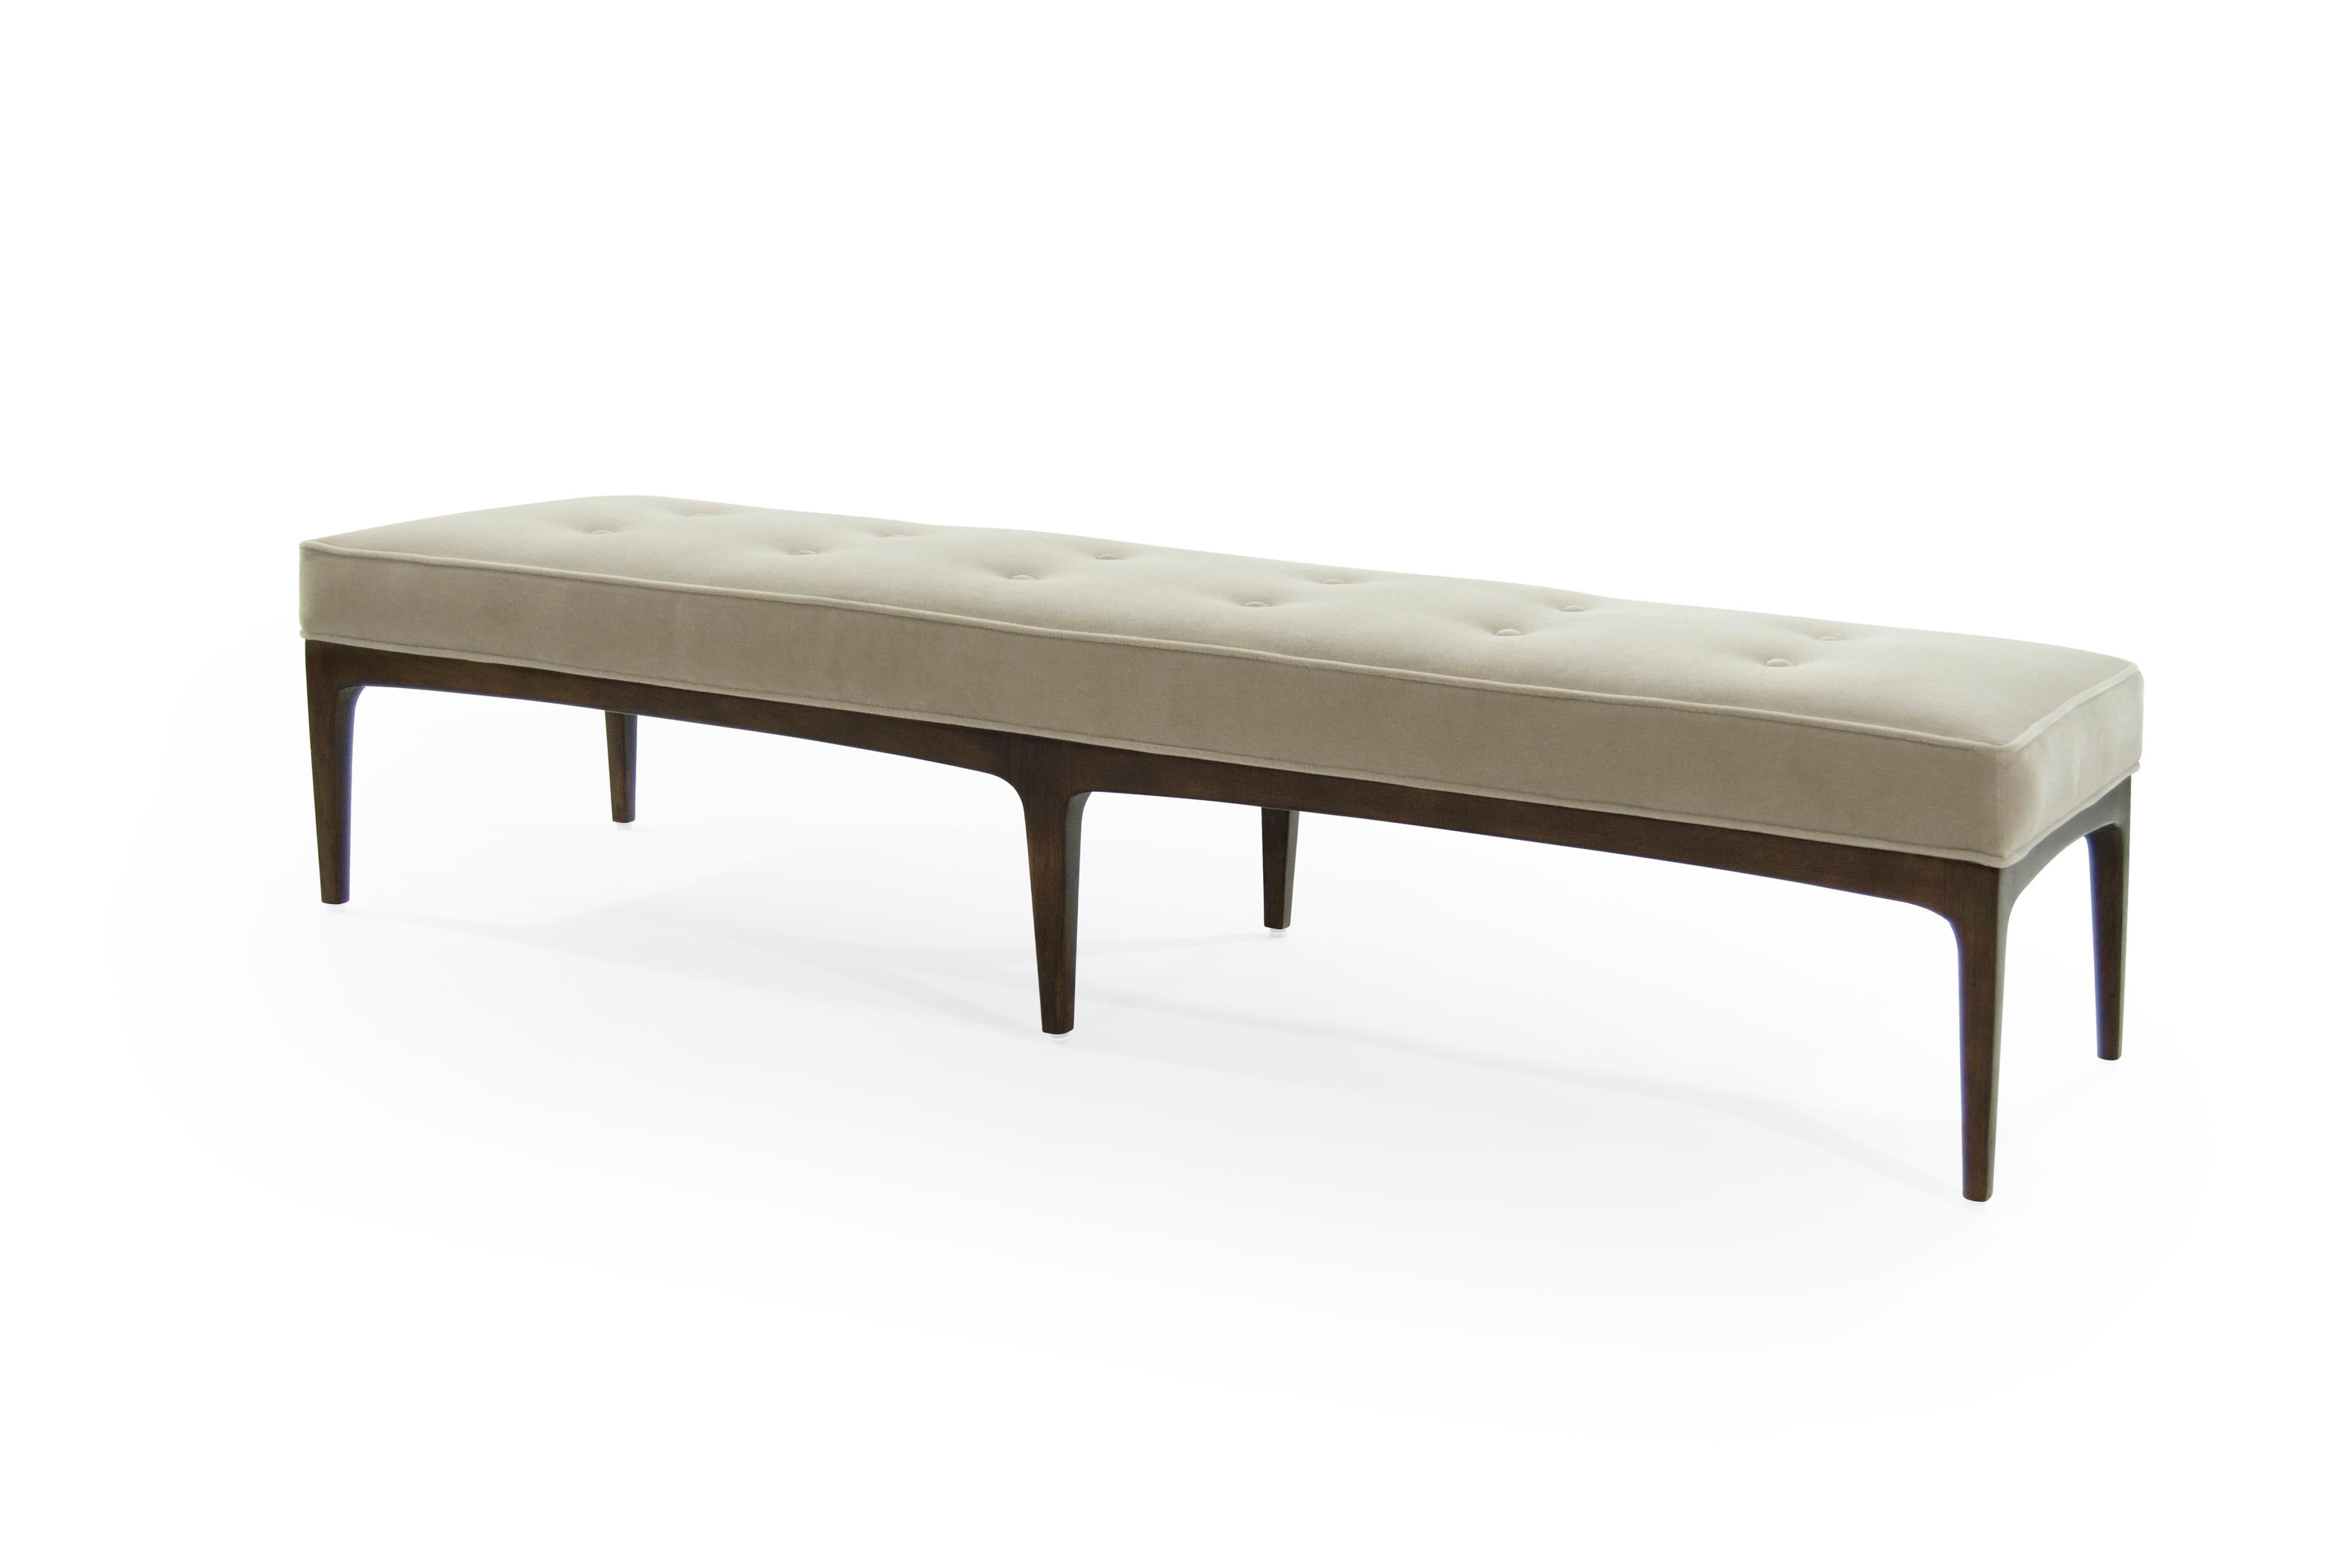 Mid-Century Modern bench in the style of Paul McCobb, circa 1950s. Newly upholstered in natural mohair by Schellens. Featuring a 12 button / semi-tufted design. Walnut base fully restored.